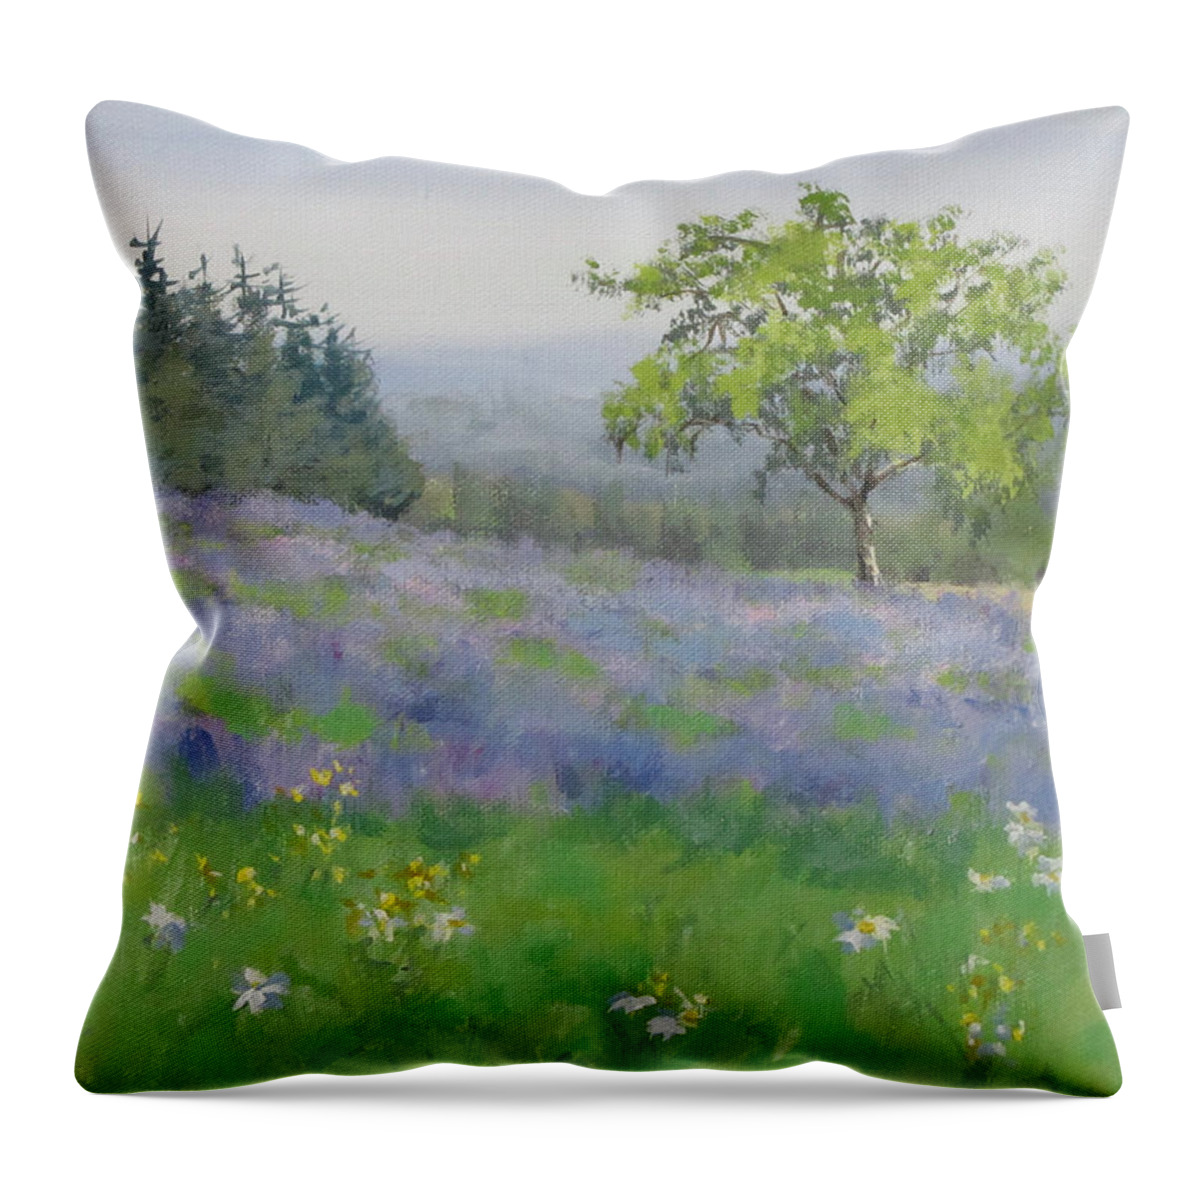 Lavender Throw Pillow featuring the painting Lavender Afternoon by Karen Ilari